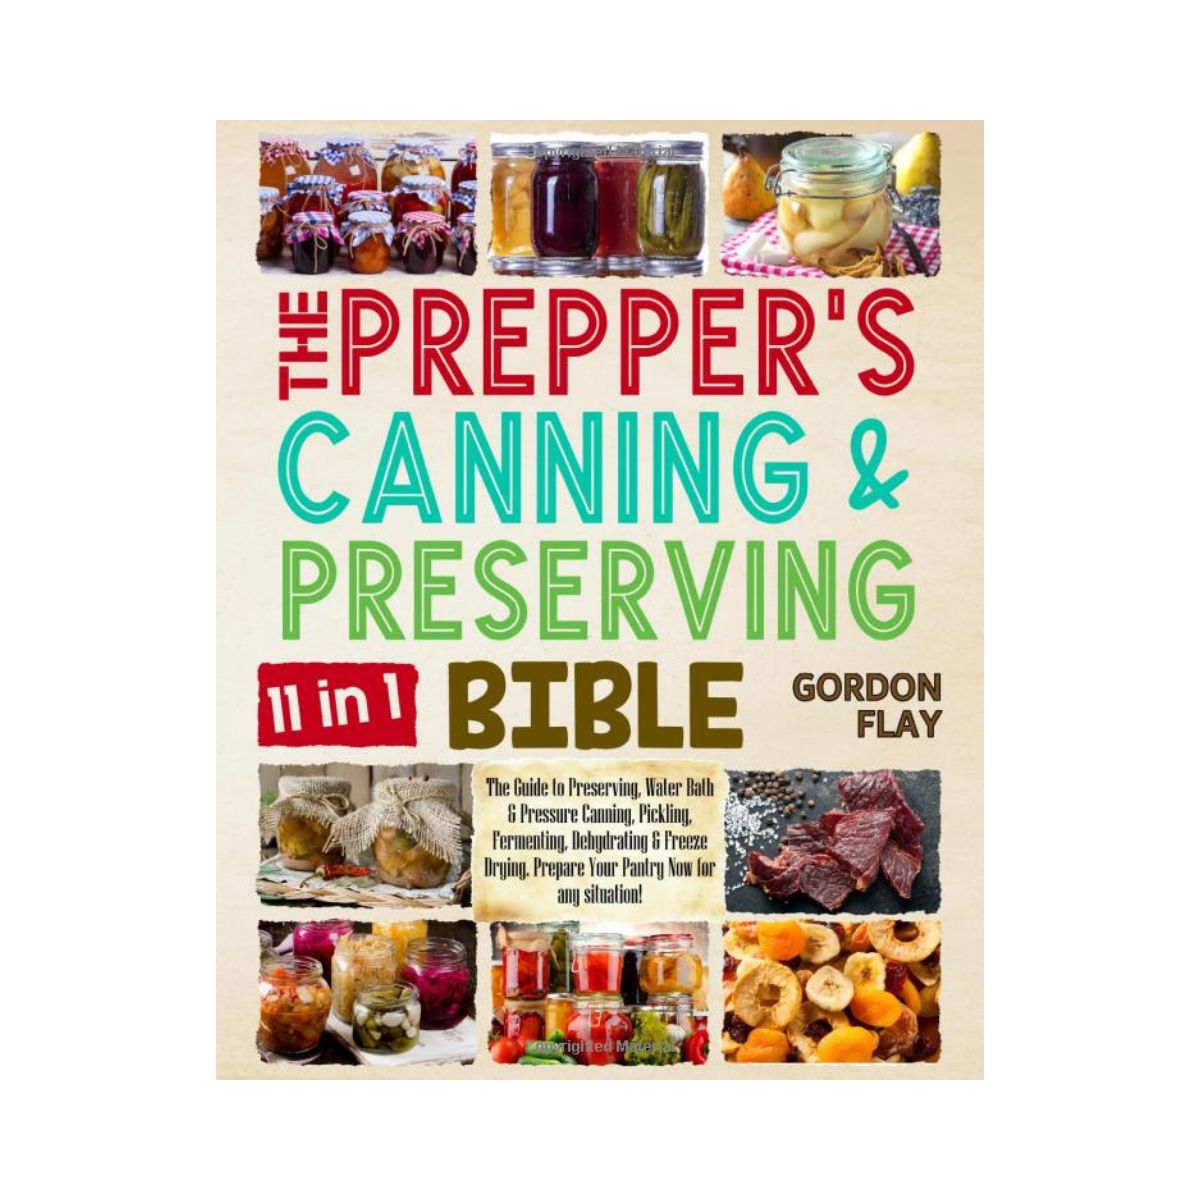 The Prepper's Canning & Preserving Bible Handbook by Gordon Flay Book Cover